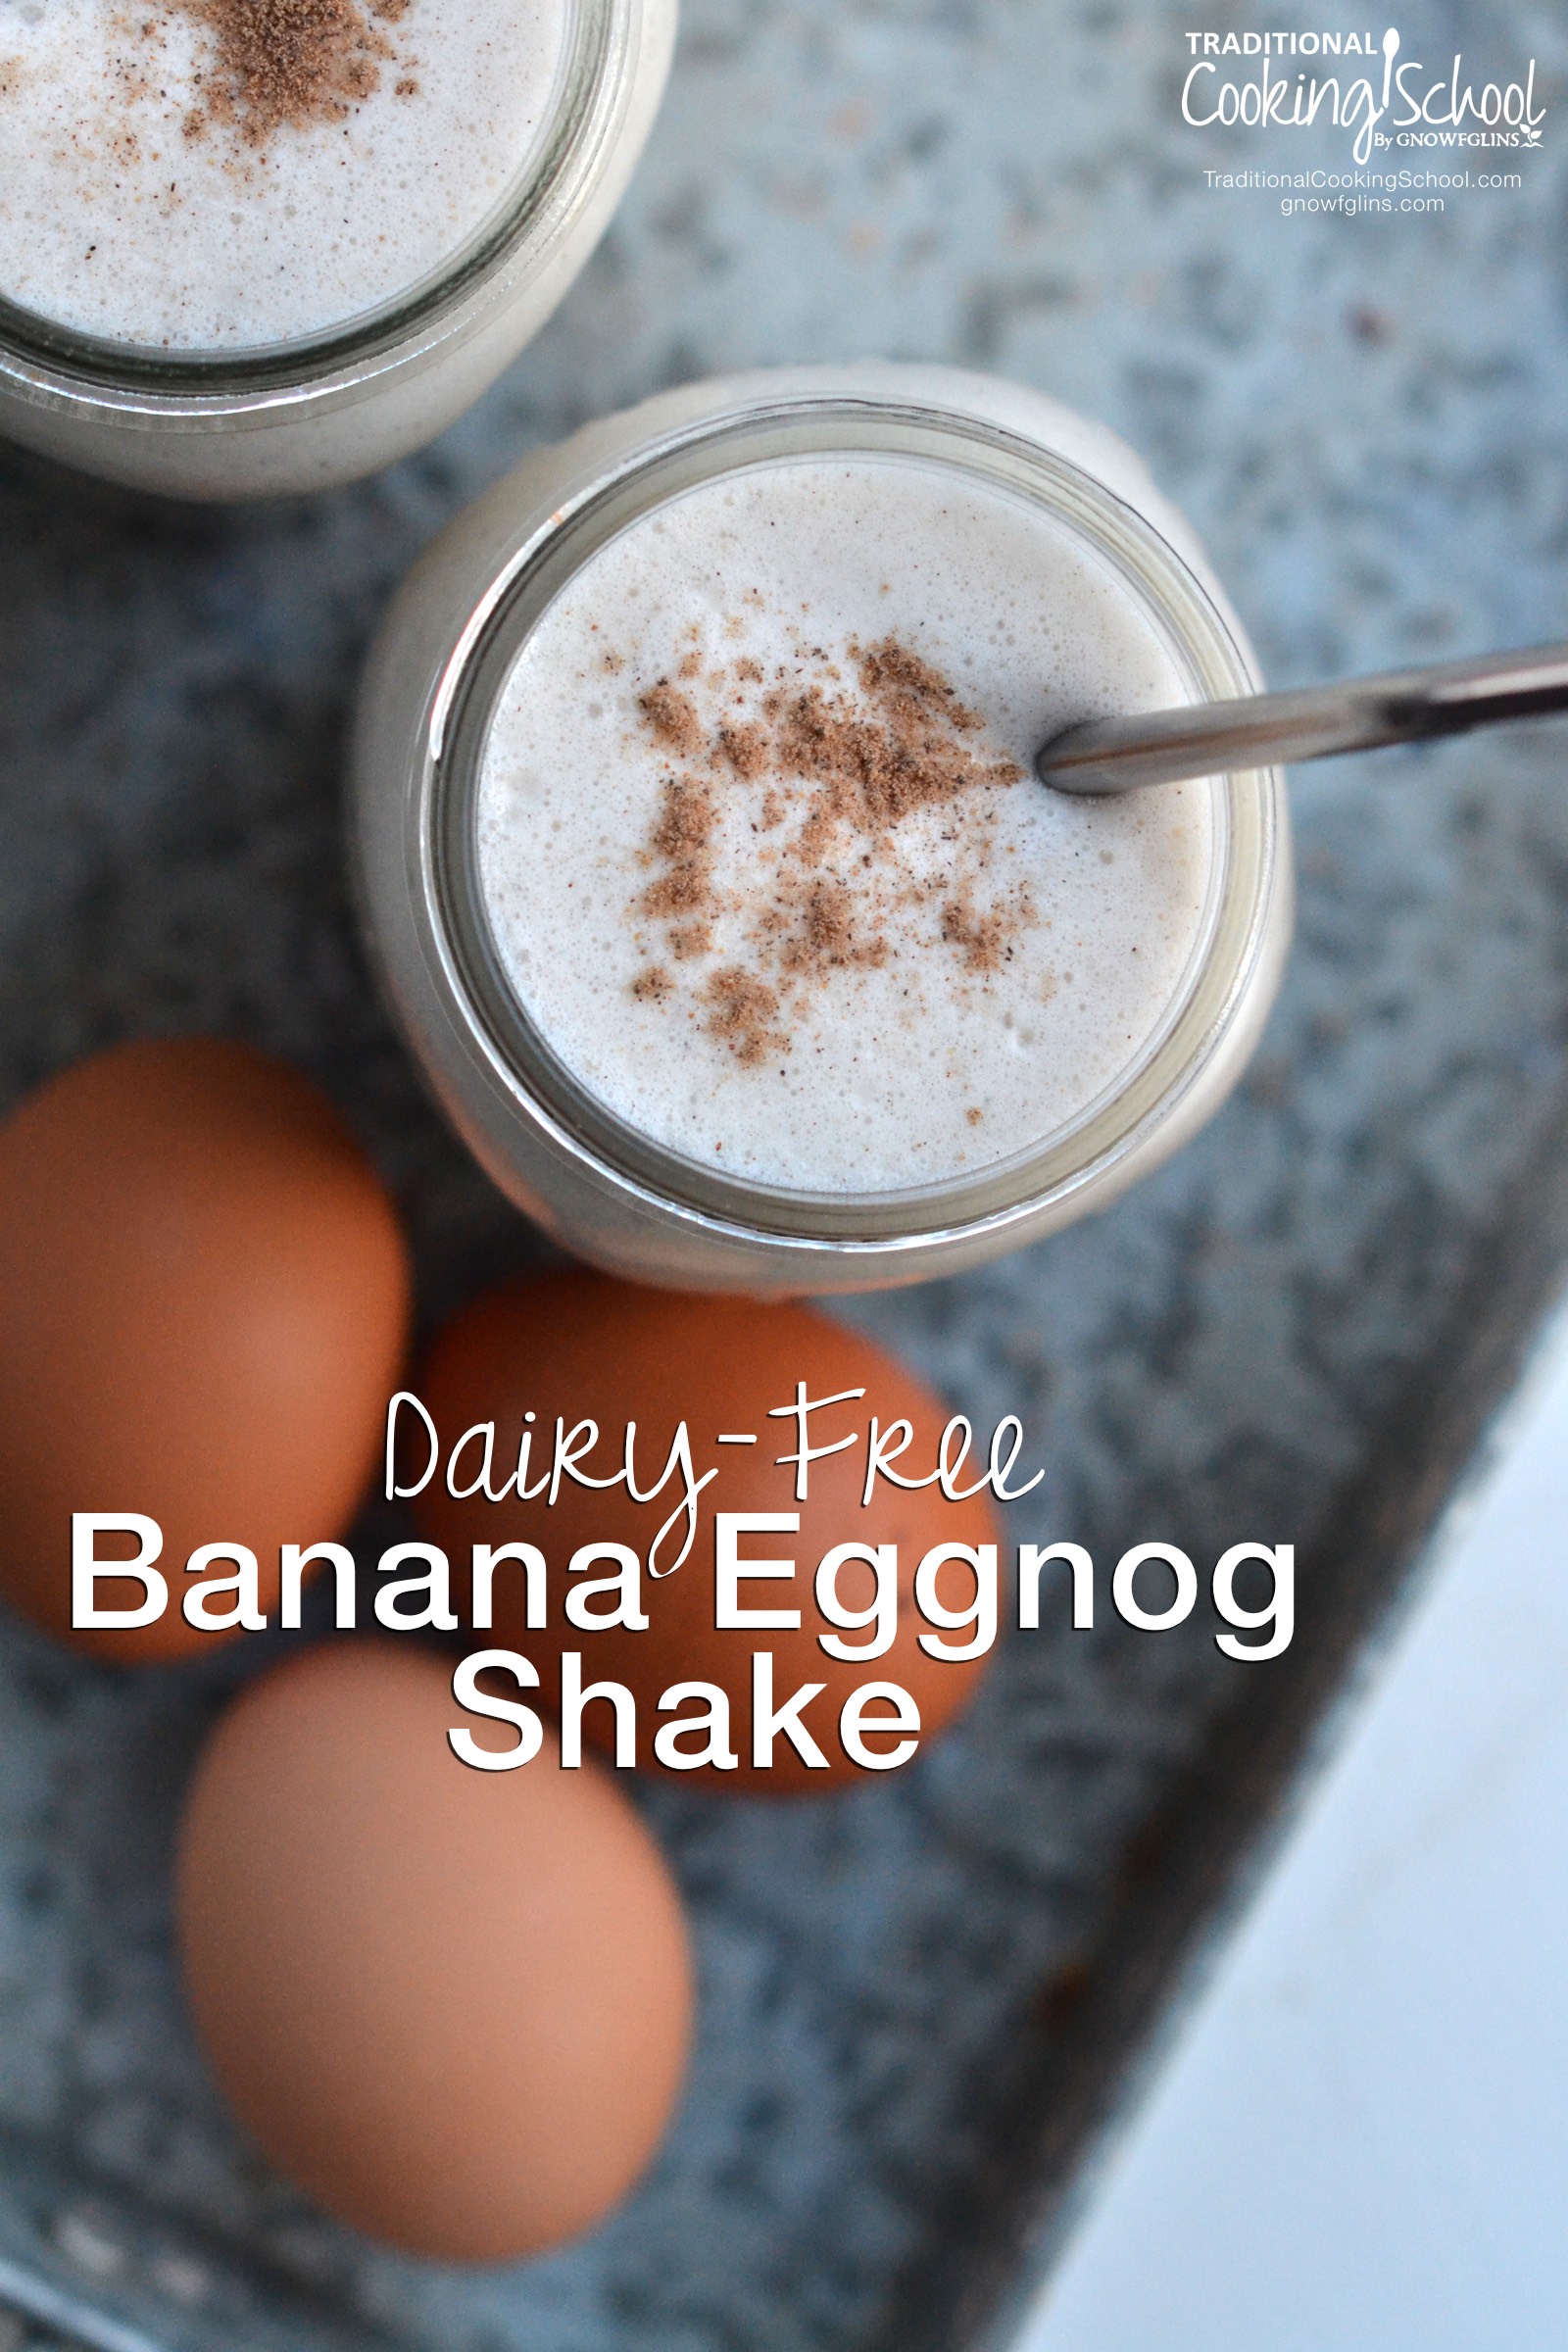 Dairy-Free Banana Eggnog Shake | What's a special treat we look forward to as soon as the holiday season arrives that is also a great way to use our nourishing pastured eggs? Homemade eggnog! While this recipe deviates somewhat from tradition, it will provide you and your family with a nourishing boost during a time usually loaded with junk food and unhealthy meals. | TraditionalCookingSchool.com